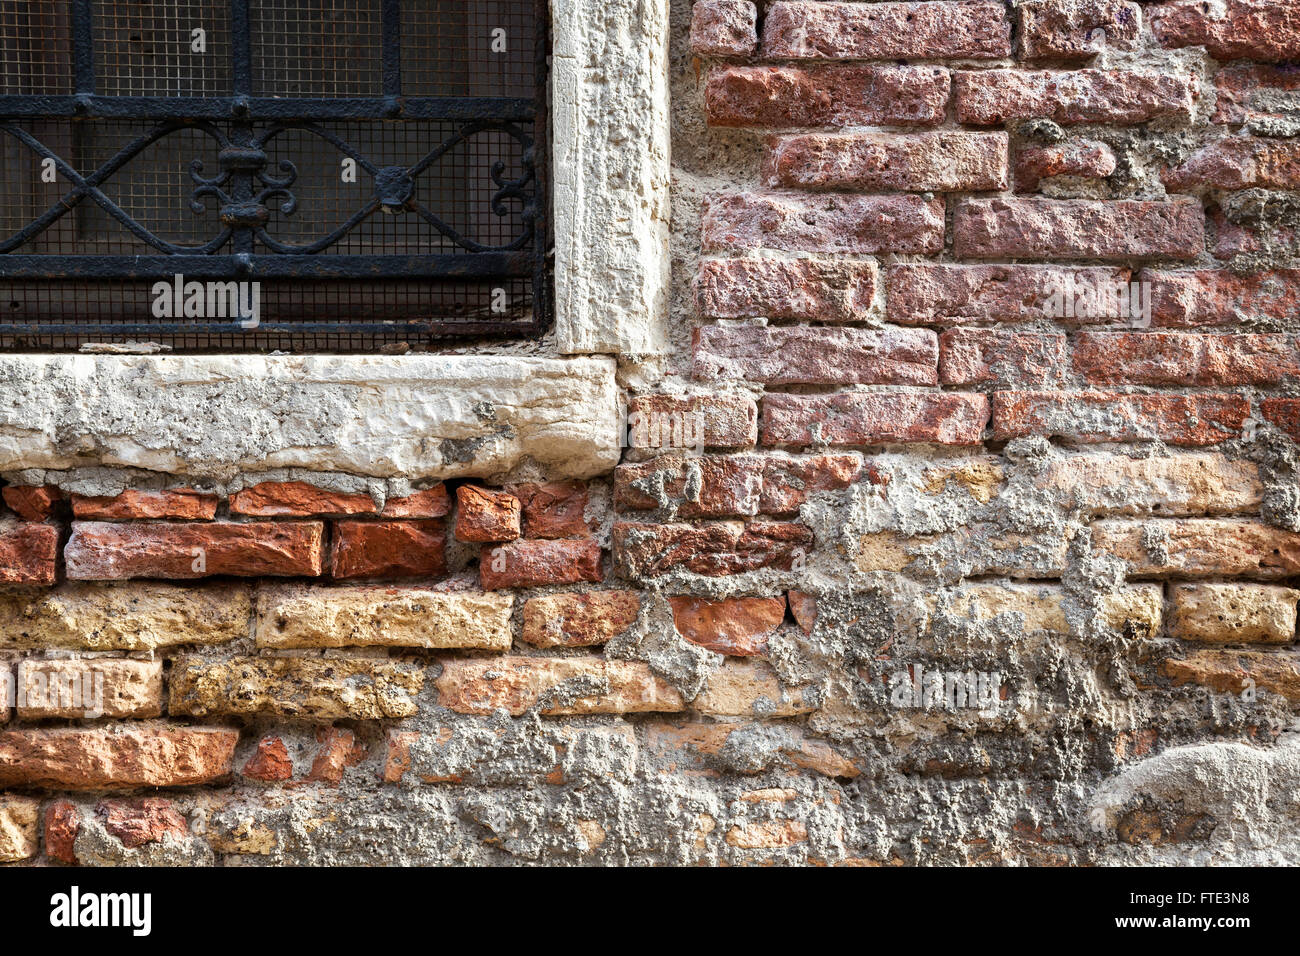 Richly coloured crumbling, exposed and decaying brickwork around a stone framed ornately barred window in a building in Venice Stock Photo